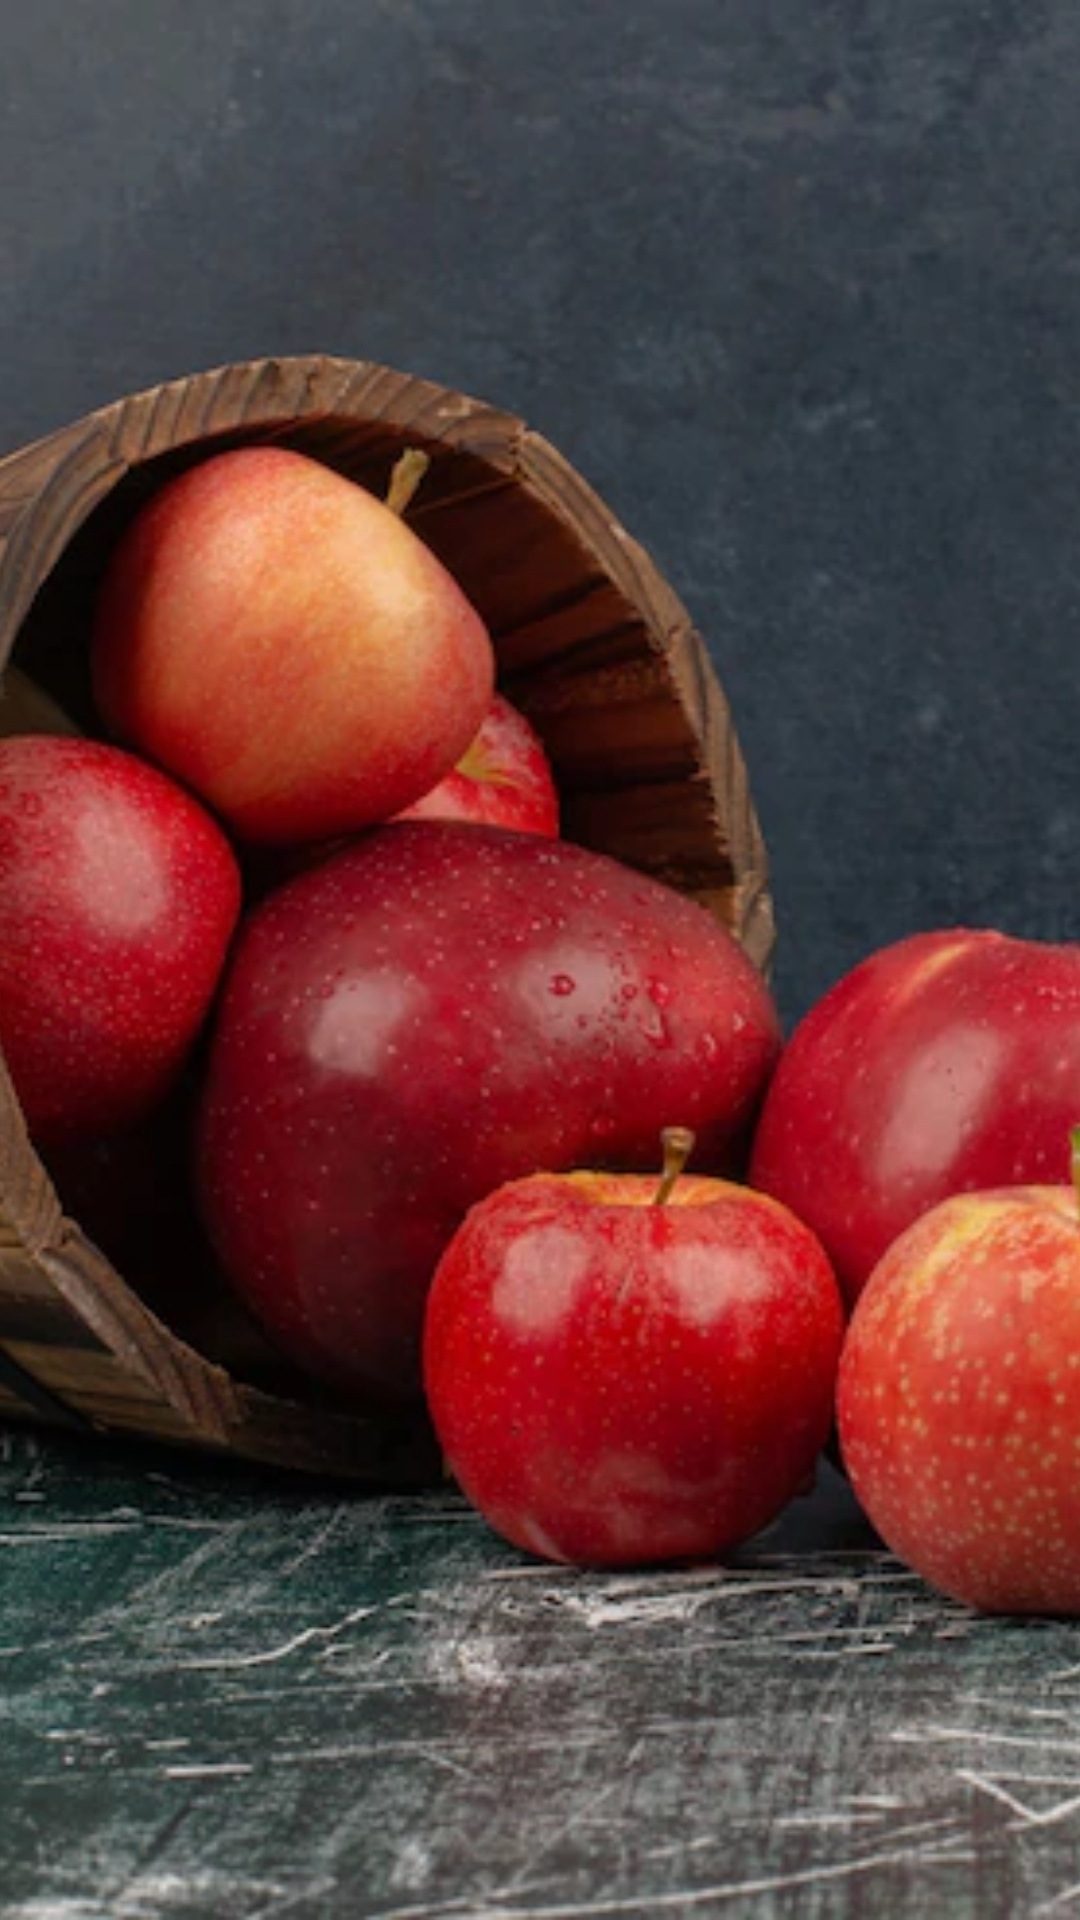 Other than strengthening lungs, know five benefits of eating Apples